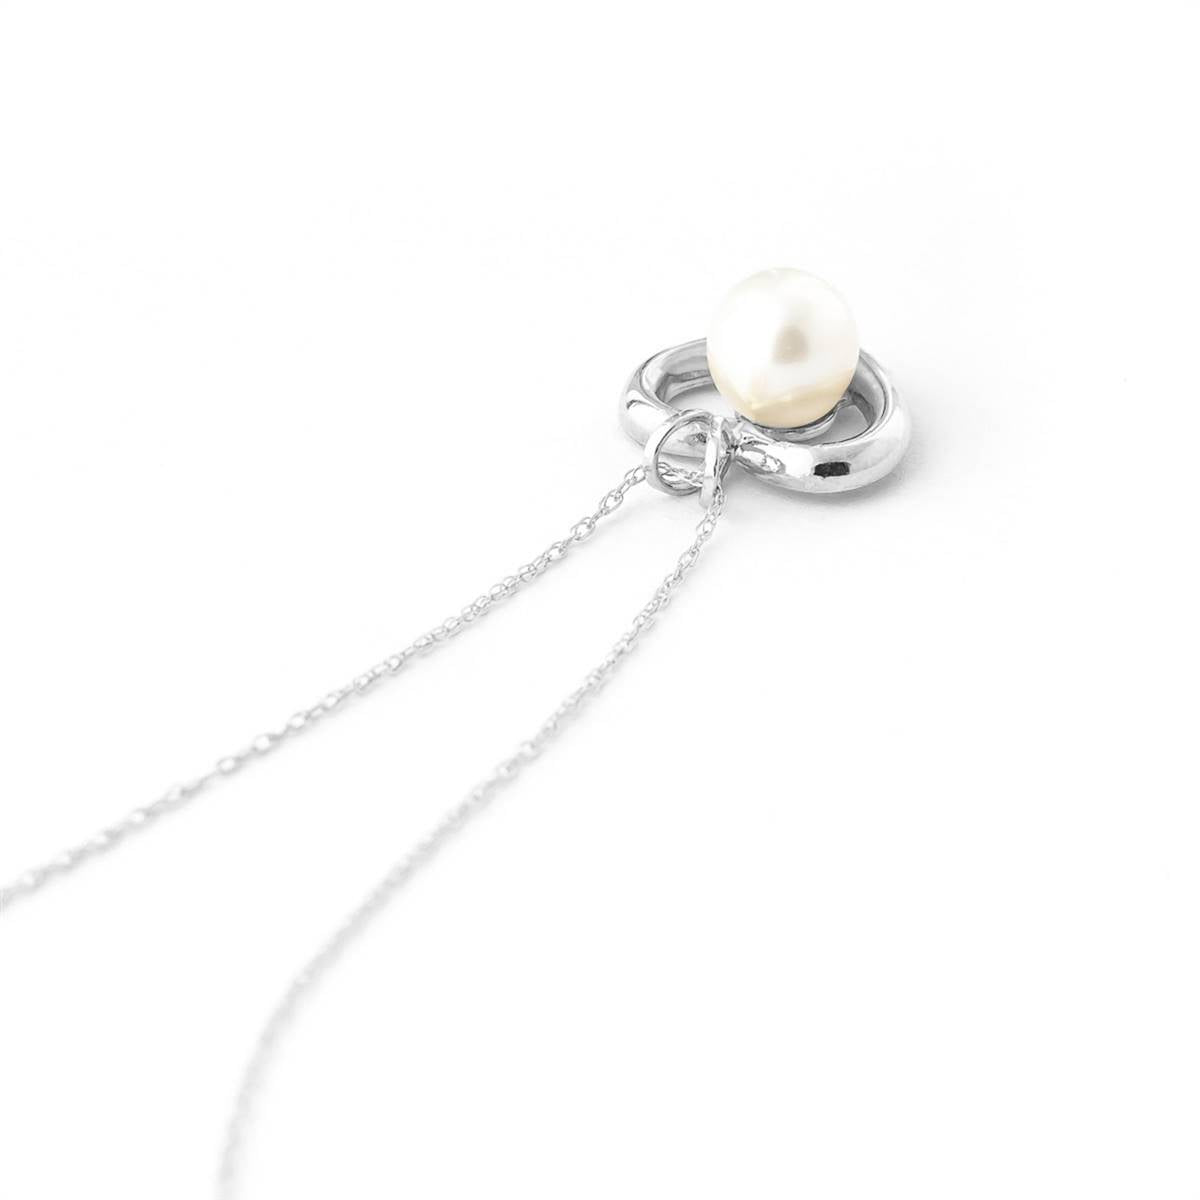 14K Solid White Gold Heart Necklace w/ Natural Pearl